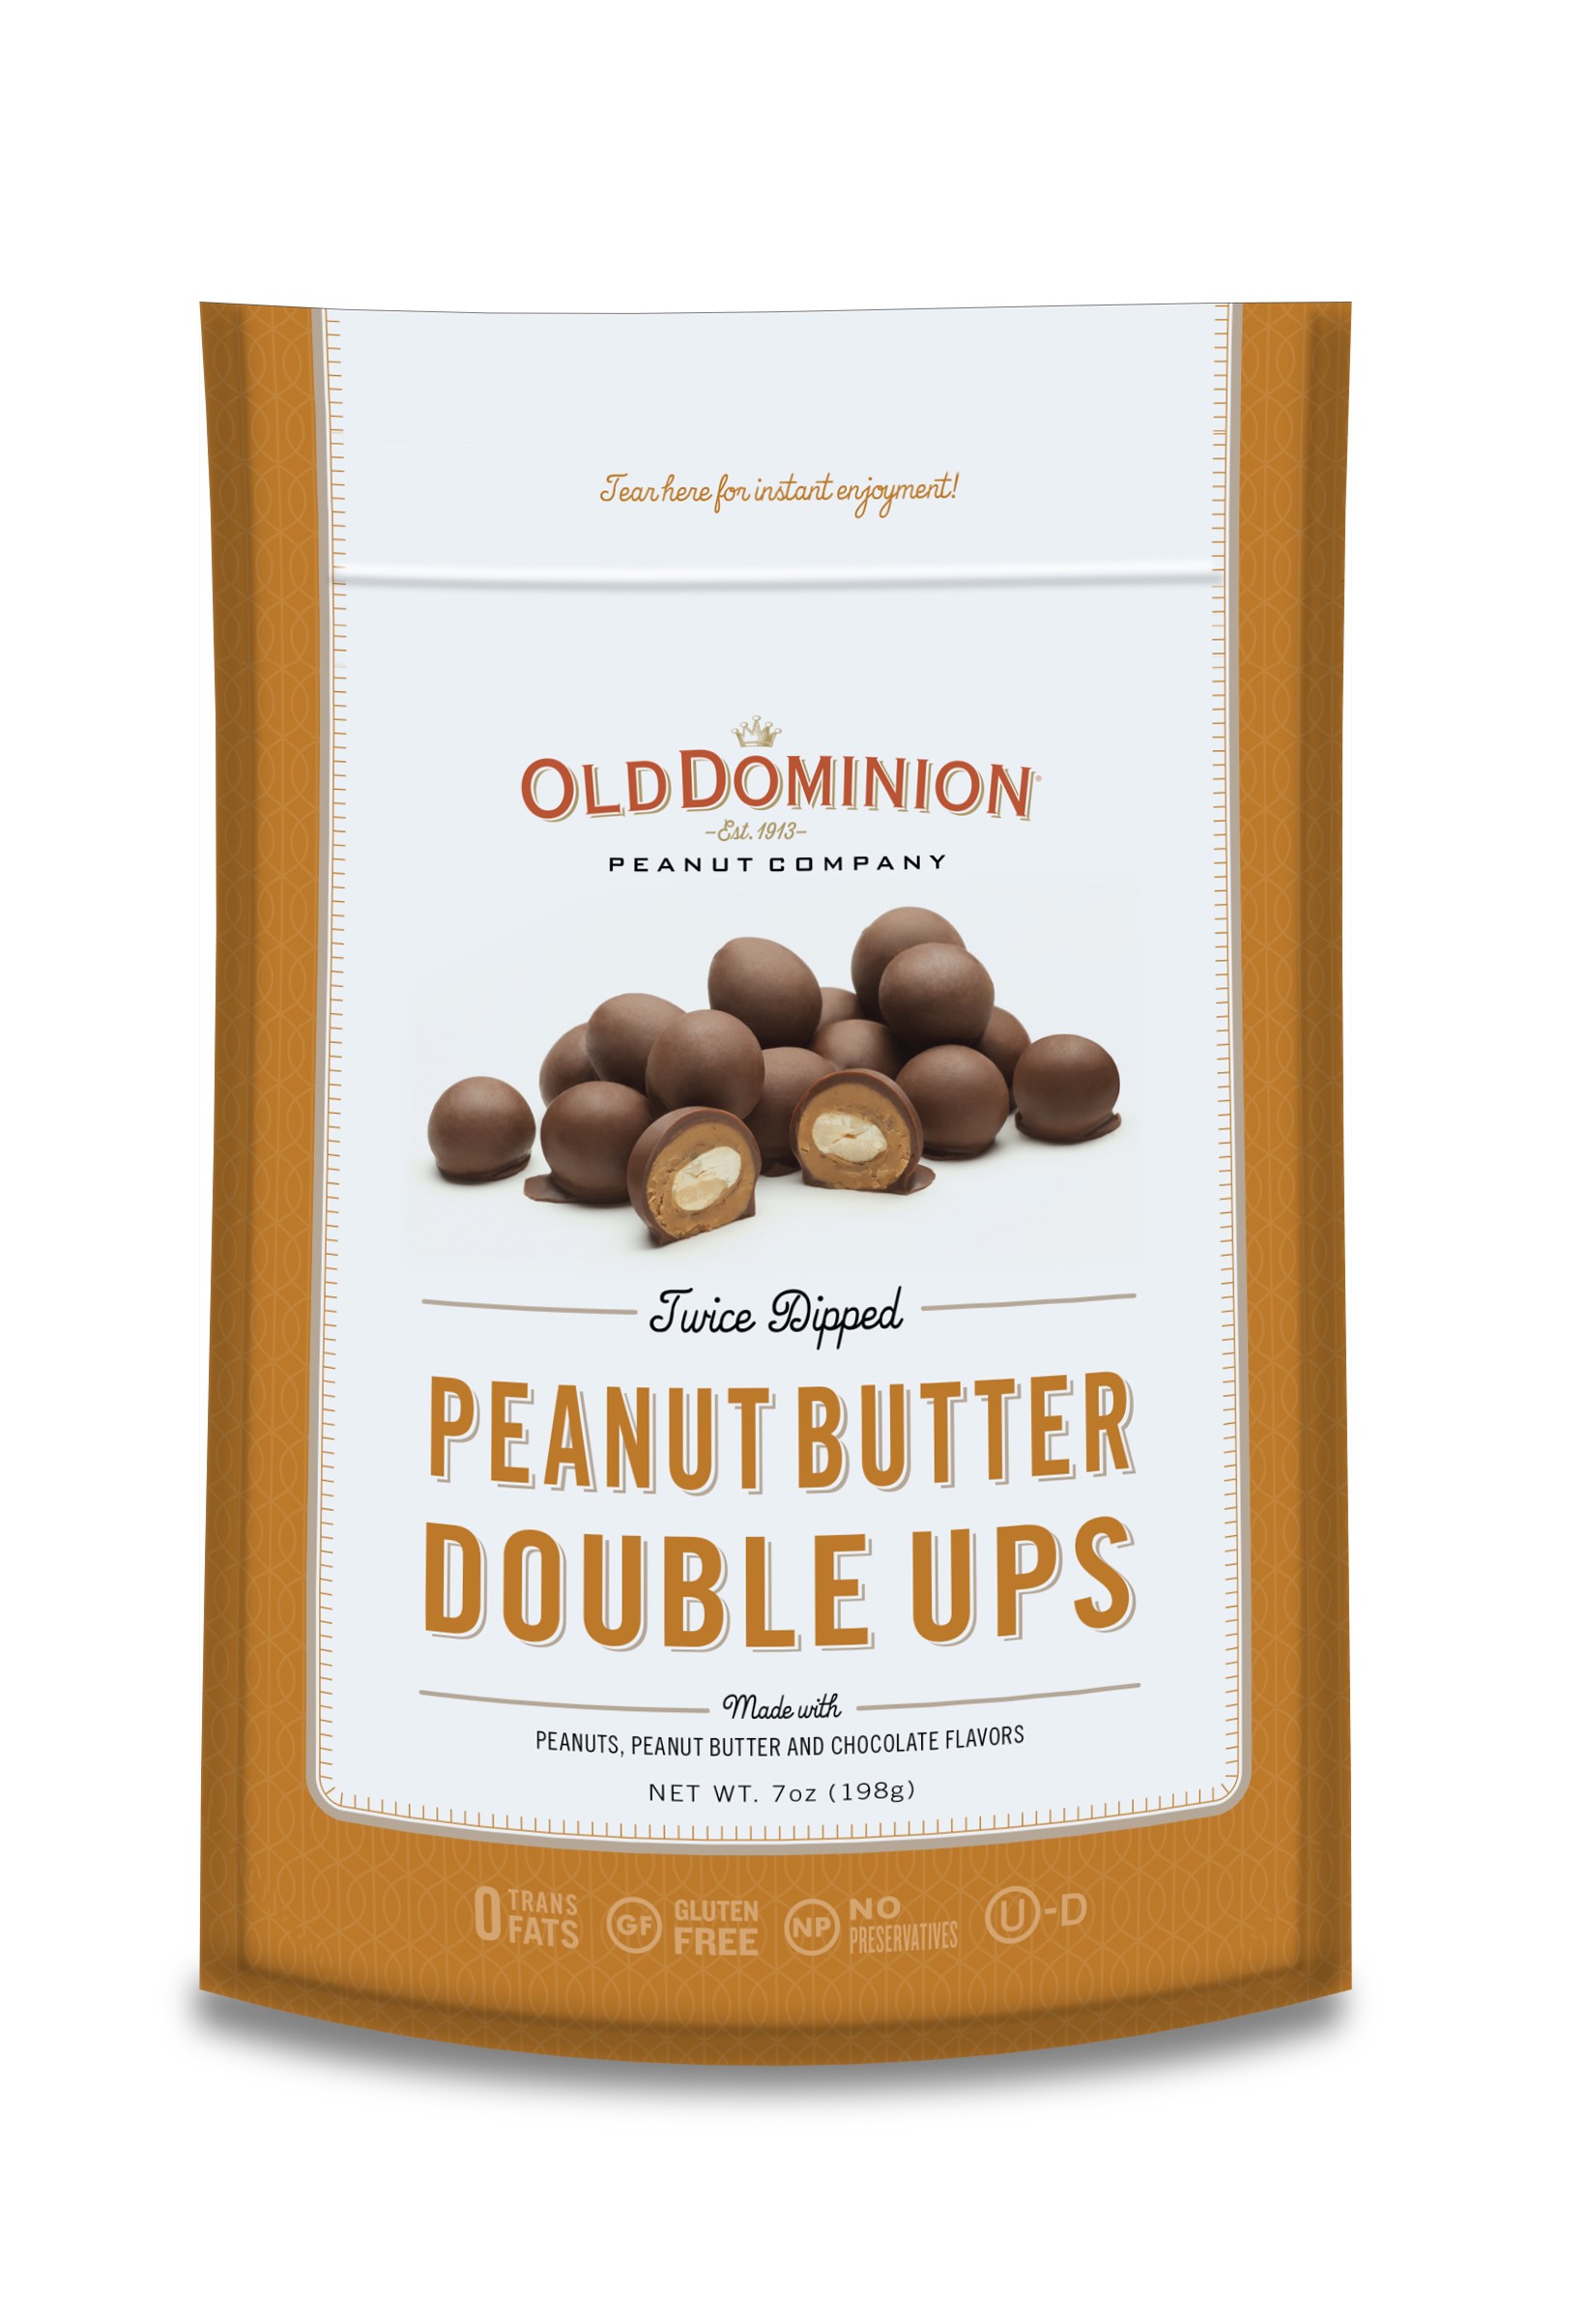 Peanut Butter Double Ups by Old Dominion Peanut Company